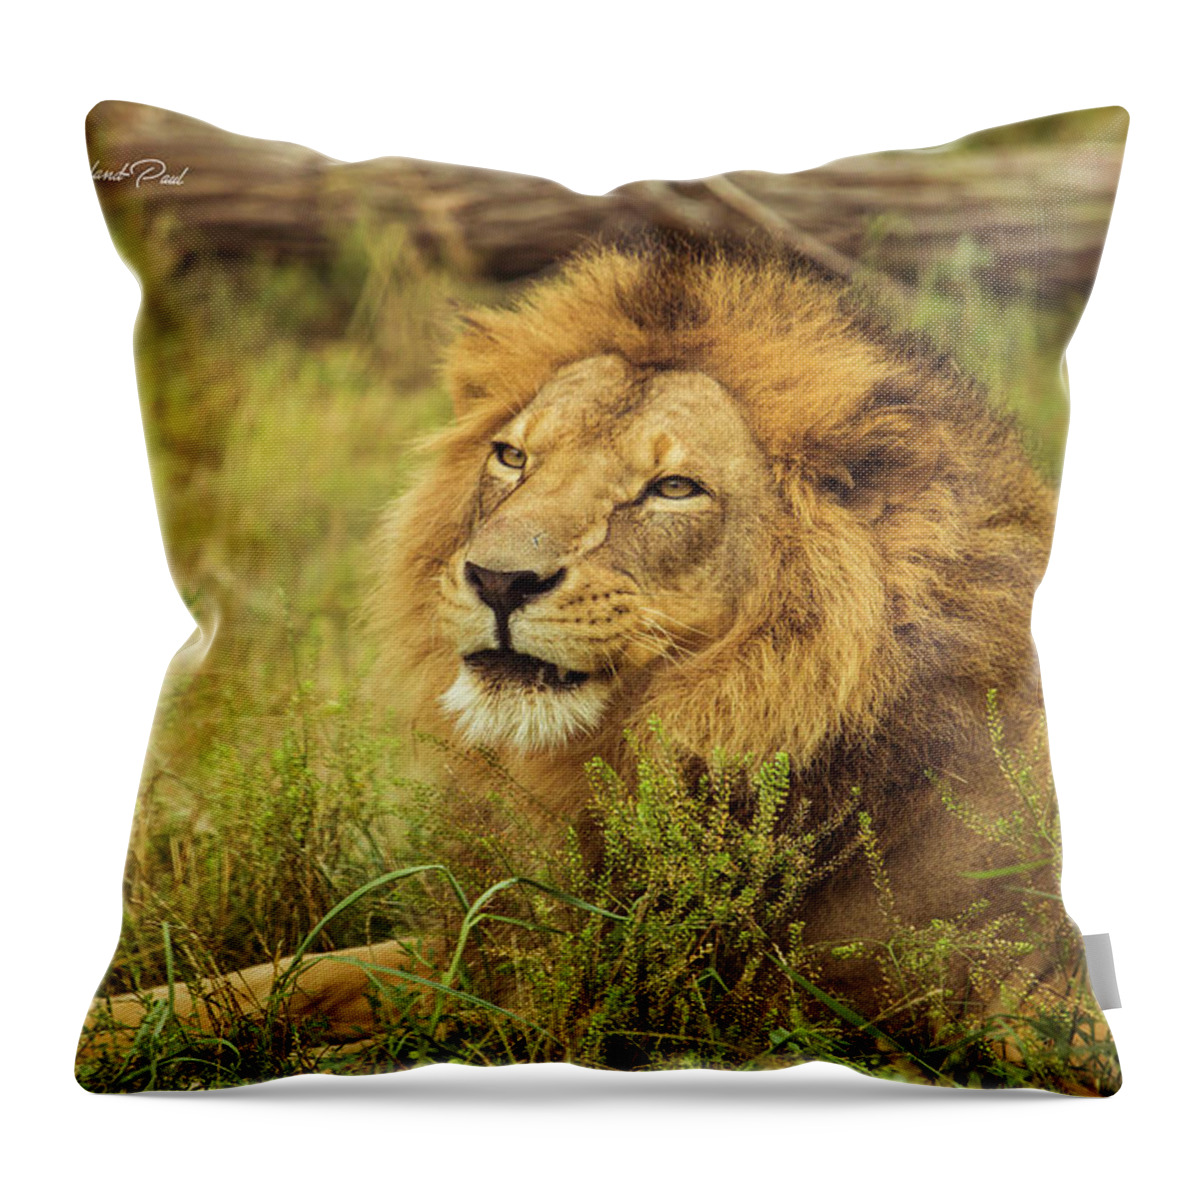 African Throw Pillow featuring the photograph African Lion Portrait by Joann Copeland-Paul